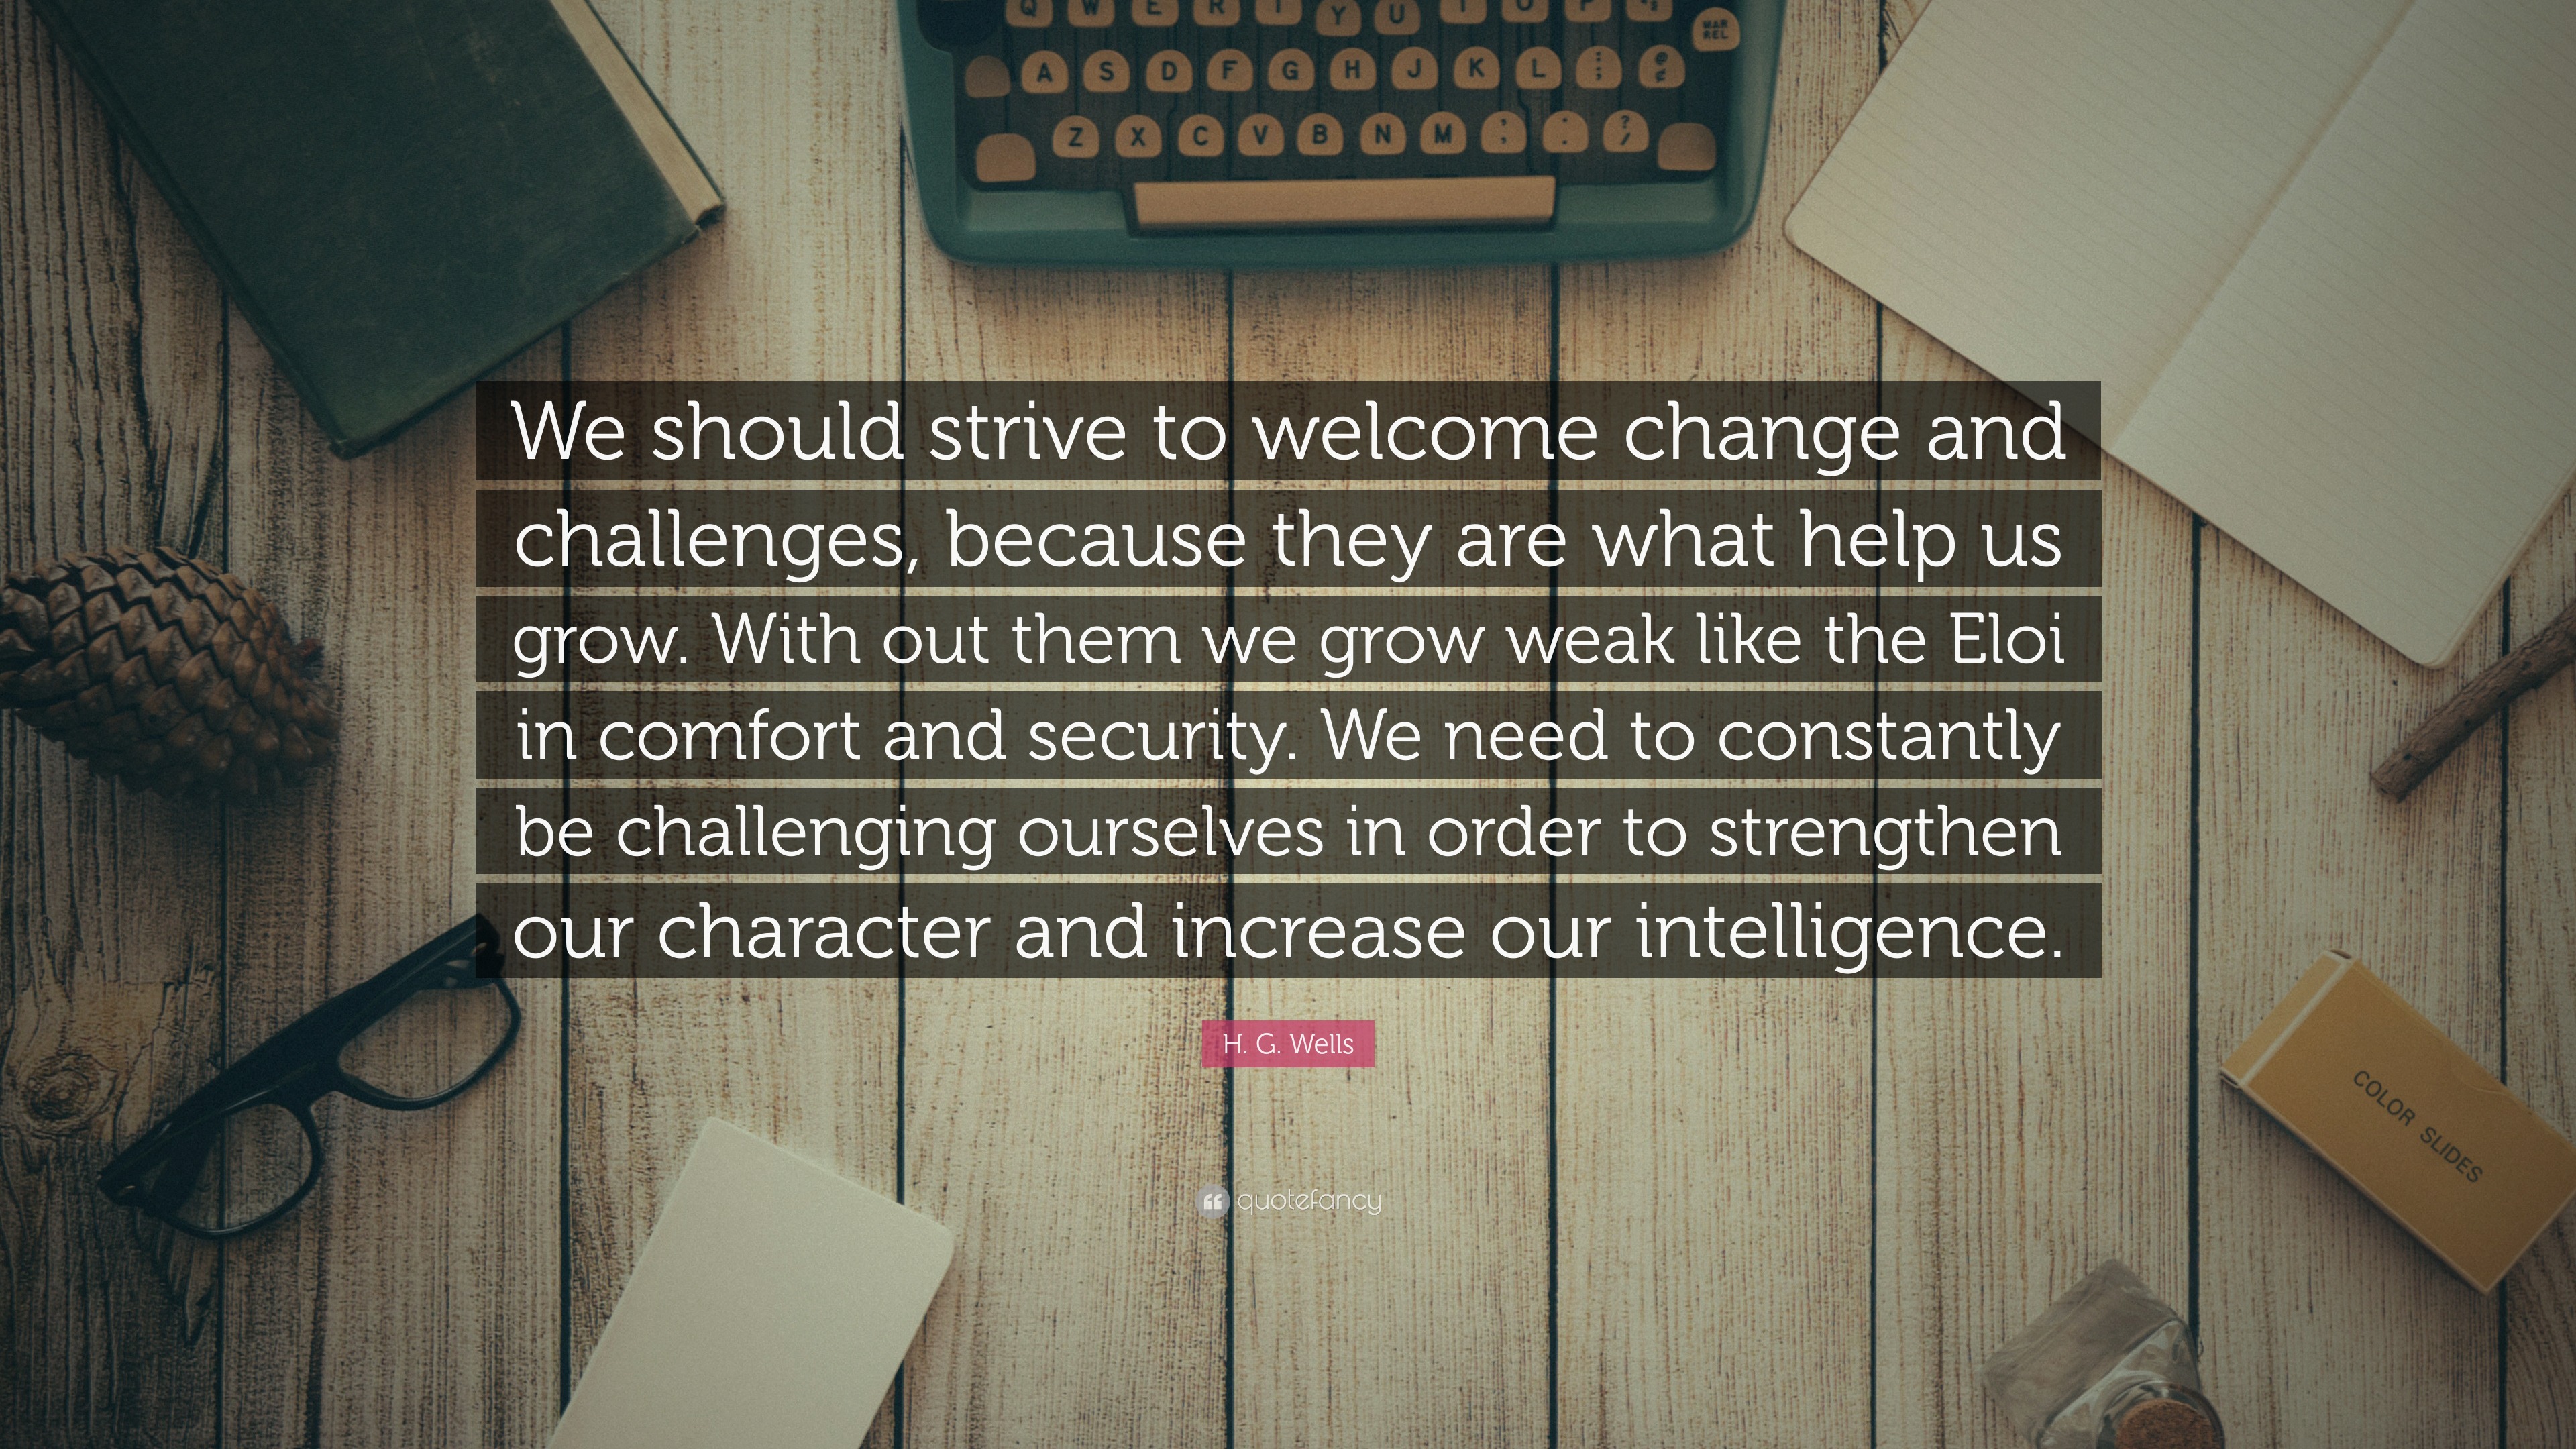 H G Wells Quote “we Should Strive To Welcome Change And Challenges